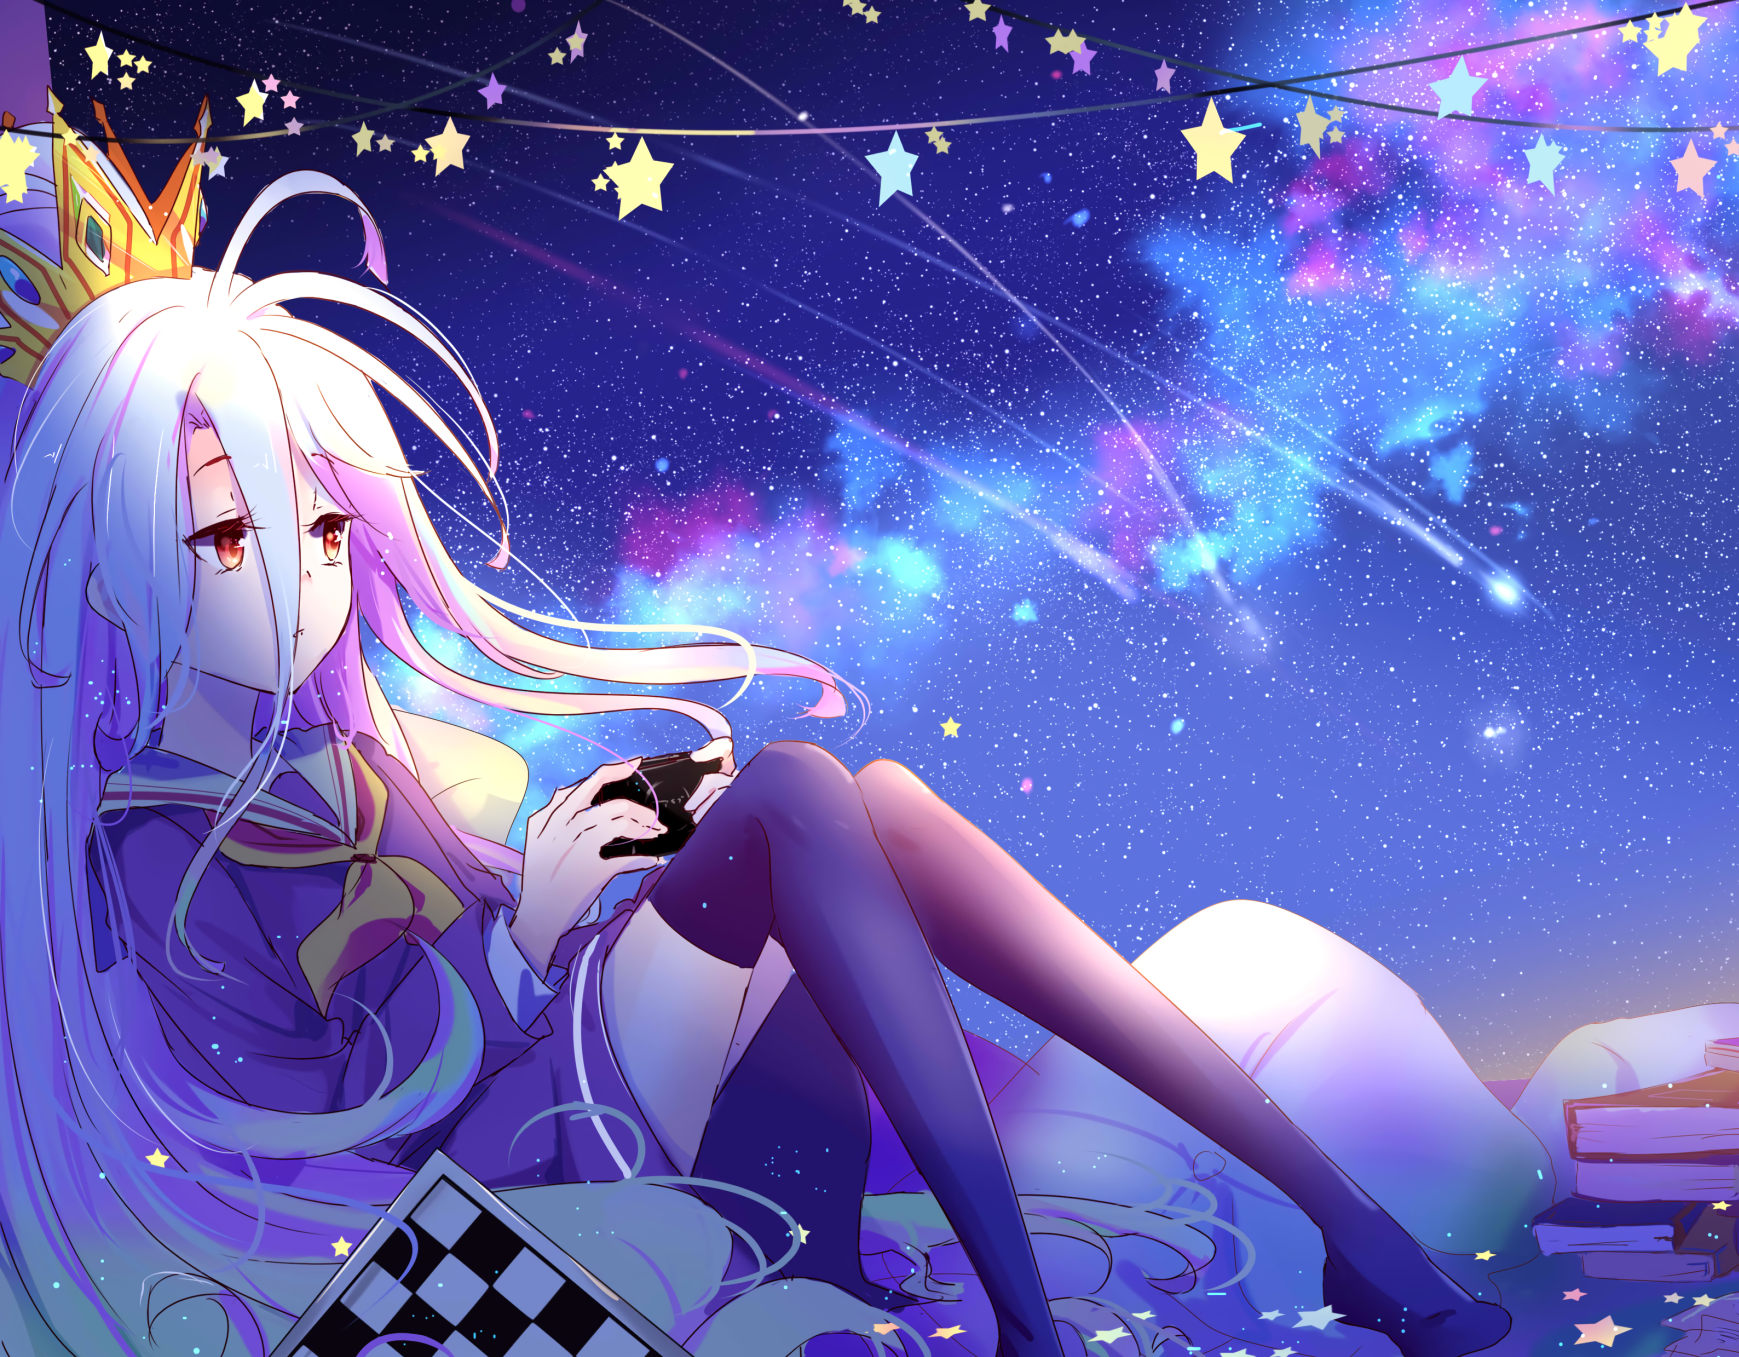 Join Sora and Shiro on their quest to be the best gamers in No Game No Life